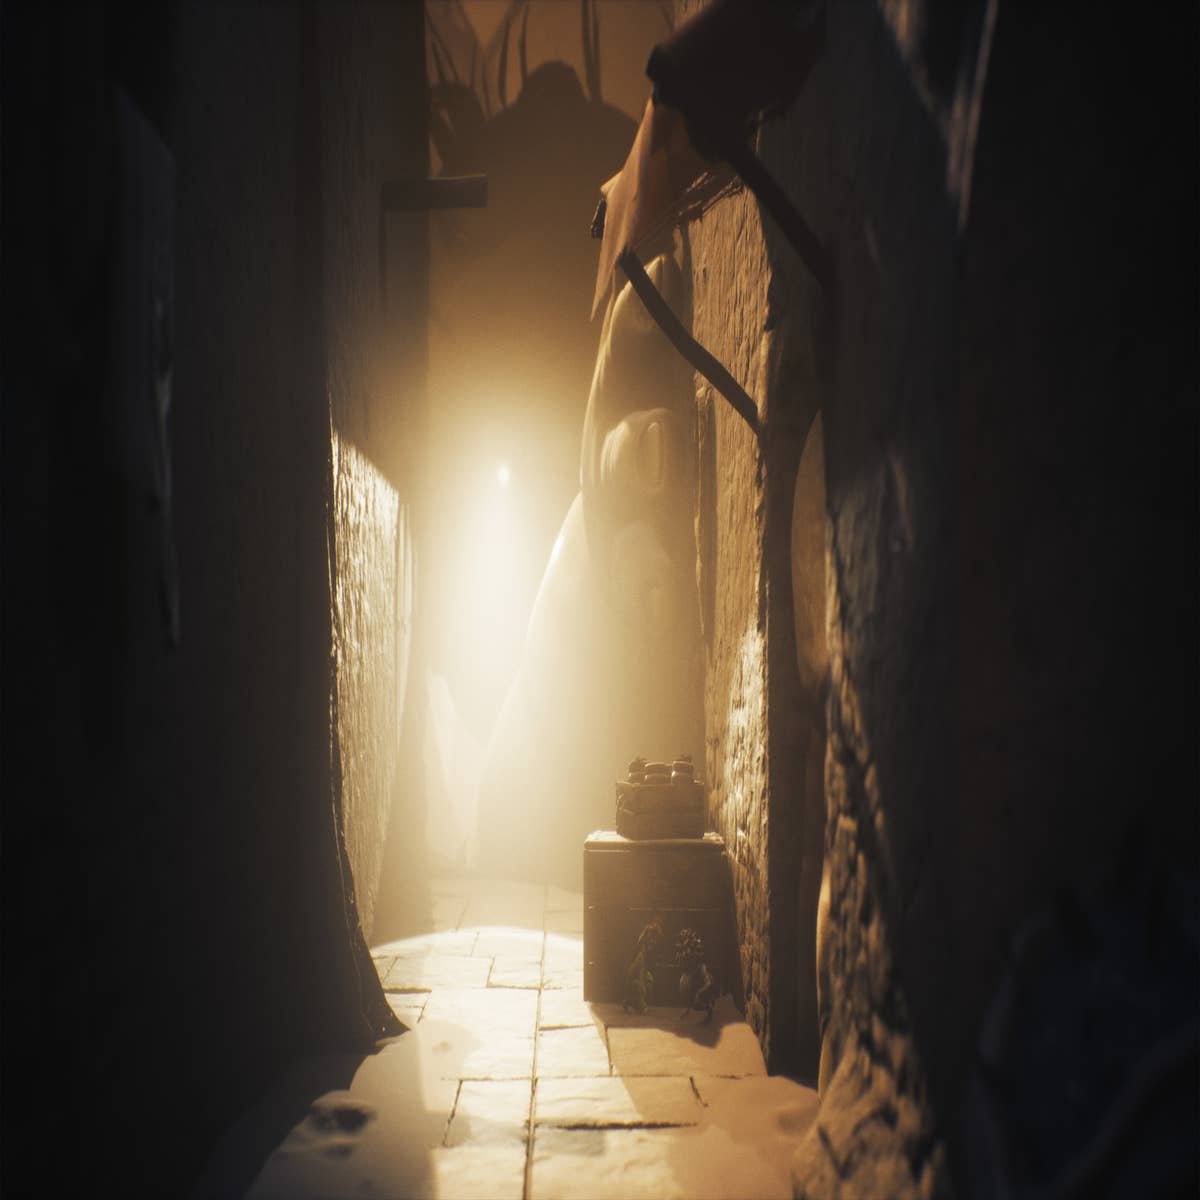 Little Nightmares 3 Announced - Siliconera